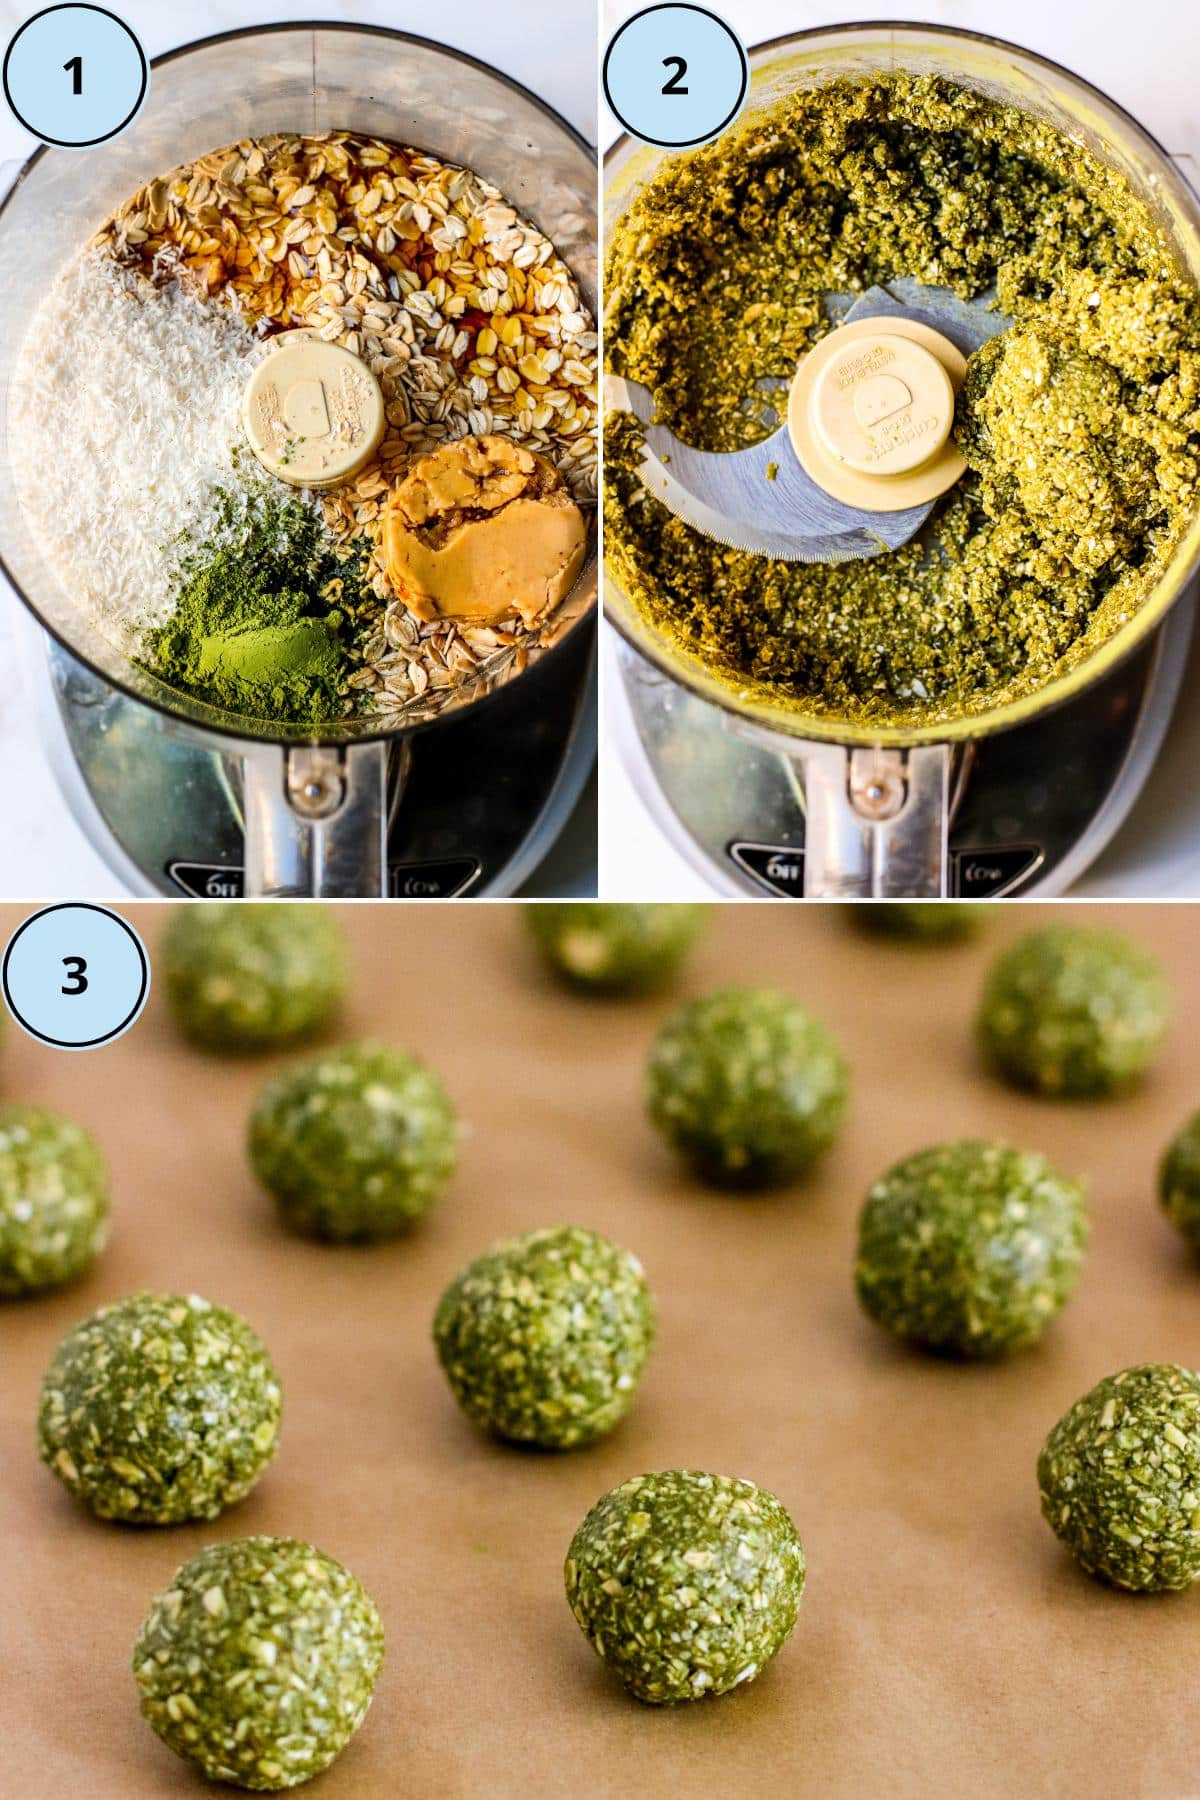 3 steps for making this recipe: Add the ingredients to the bowl of a food processor, process until combined, and roll into balls.